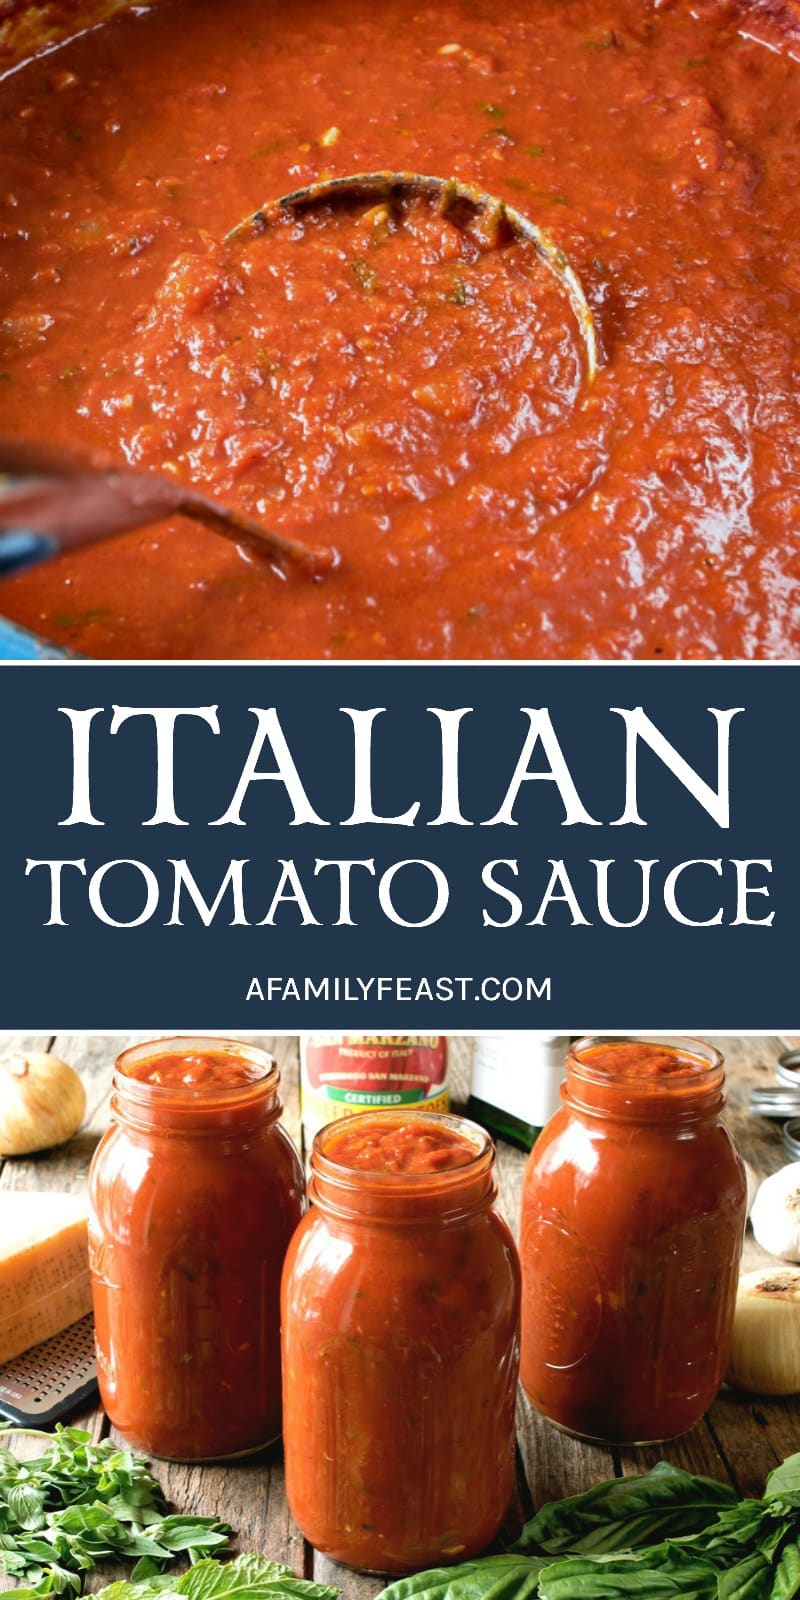 An authentic and delicious Italian Tomato Sauce that has been passed down through generations. So good, it